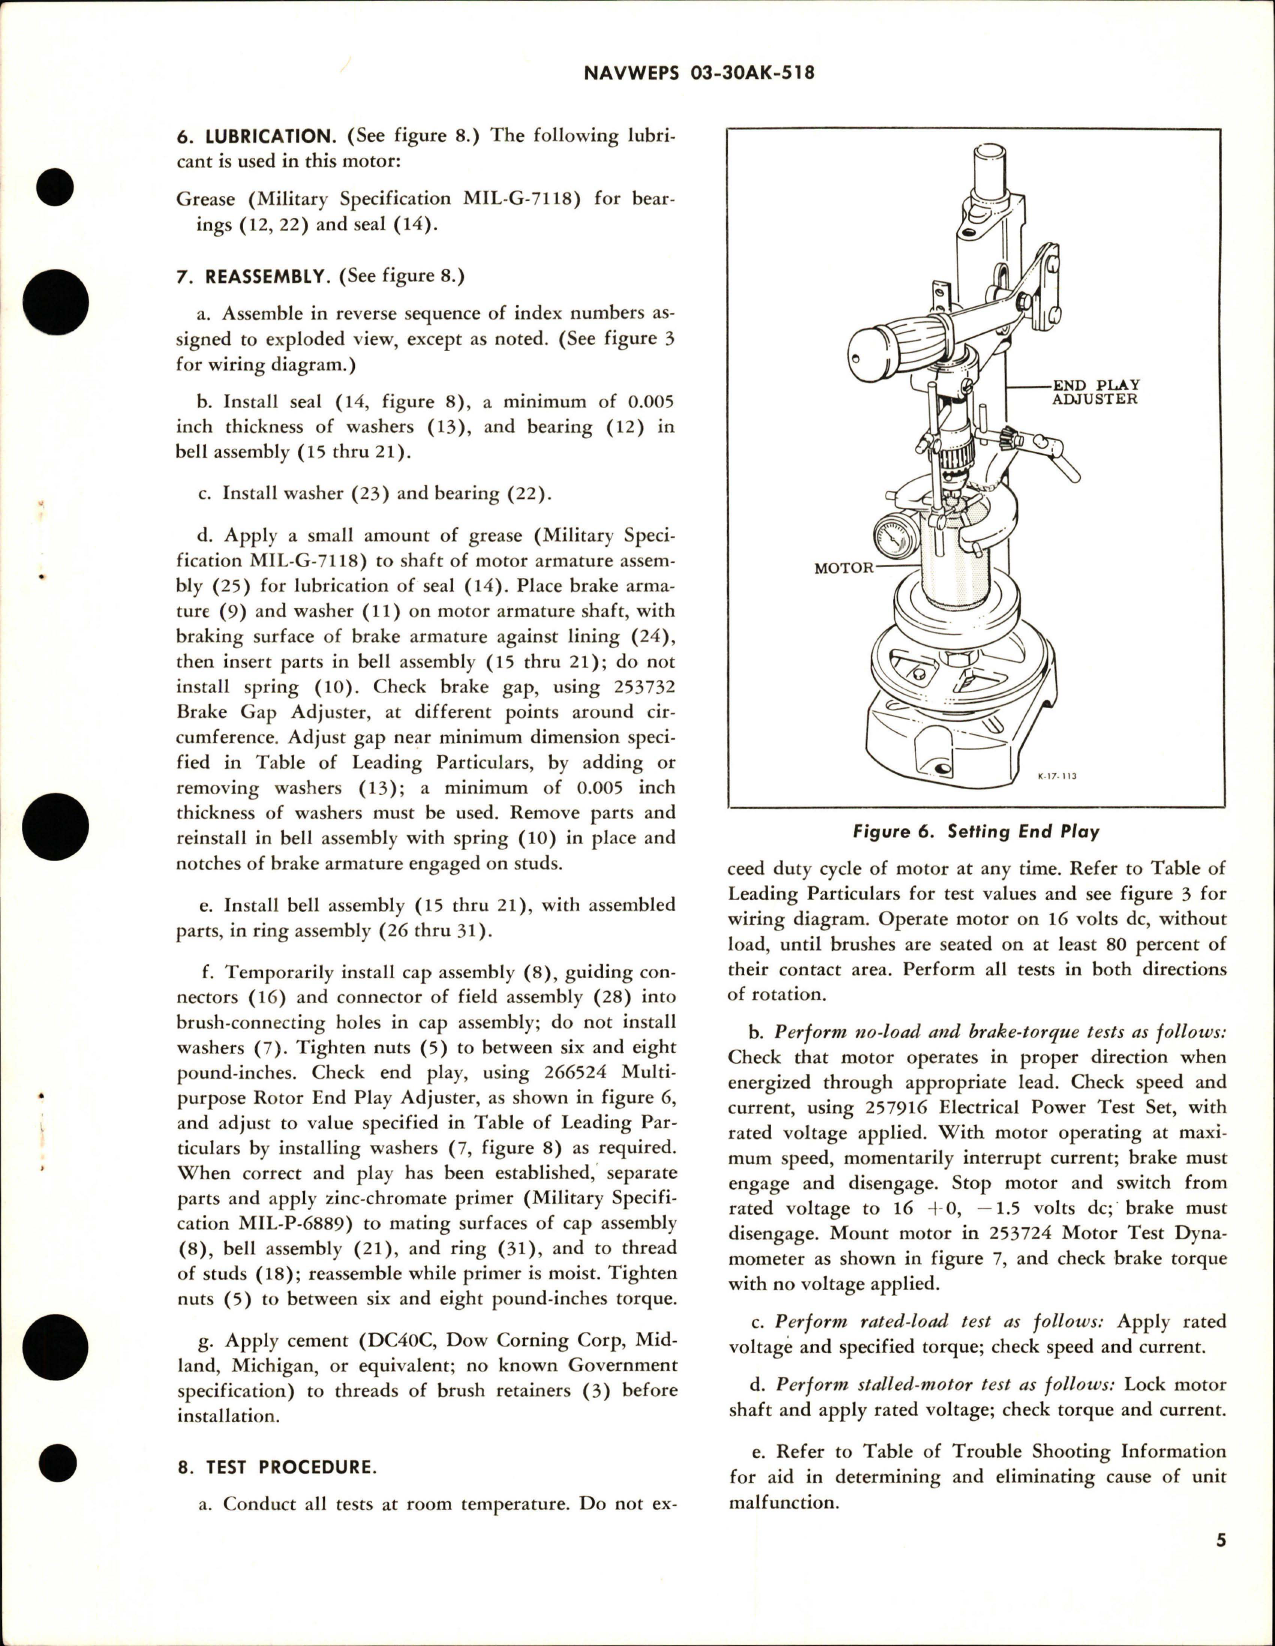 Sample page 5 from AirCorps Library document: Overhaul Instructions with Parts Breakdown for Direct-Current Motor - Part 32767